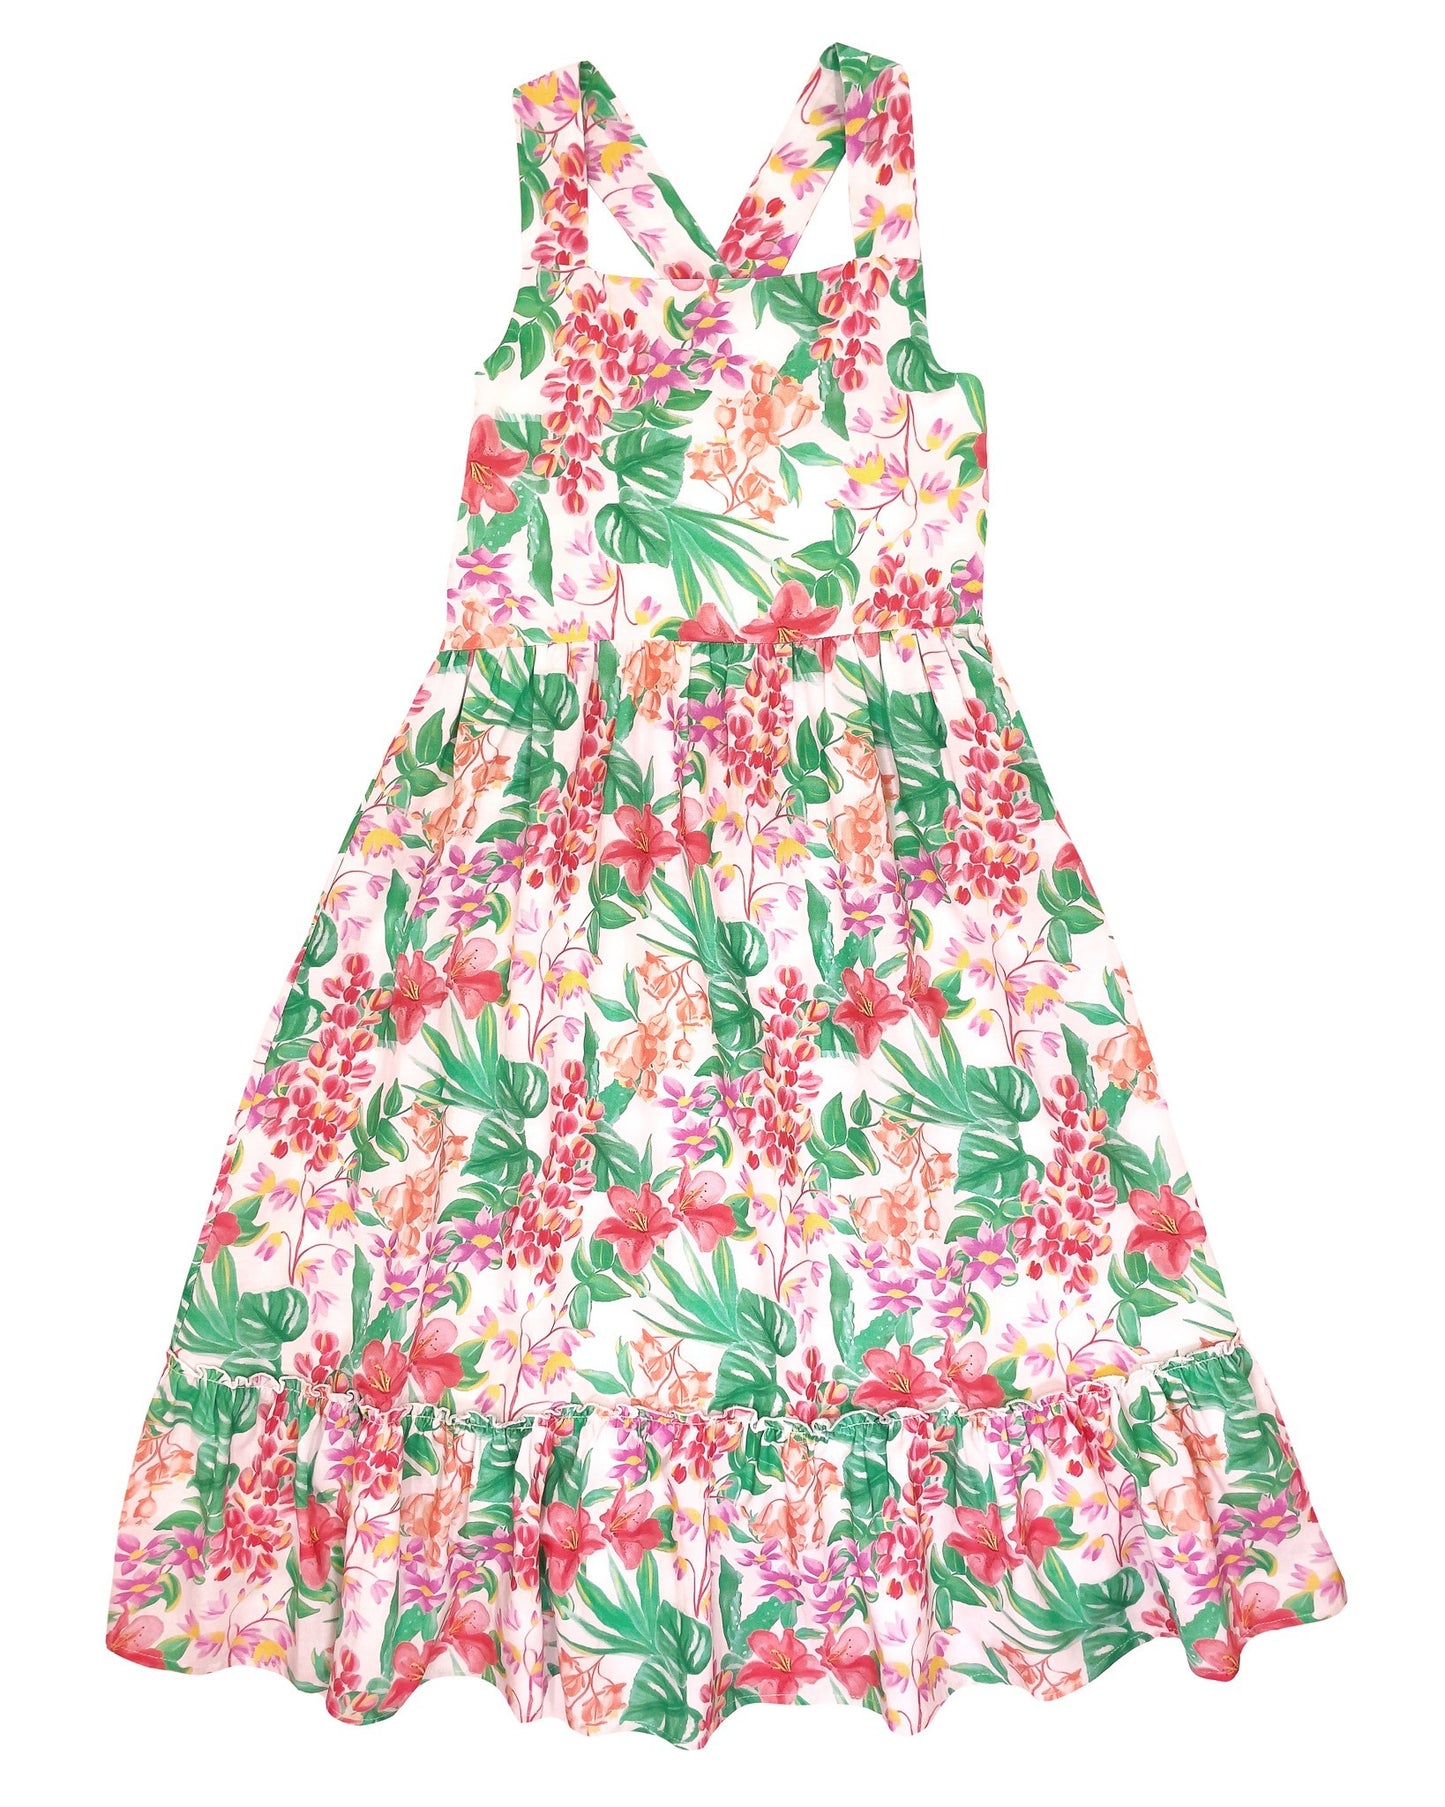 Load image into Gallery viewer, Coast Line Maxi Dress
